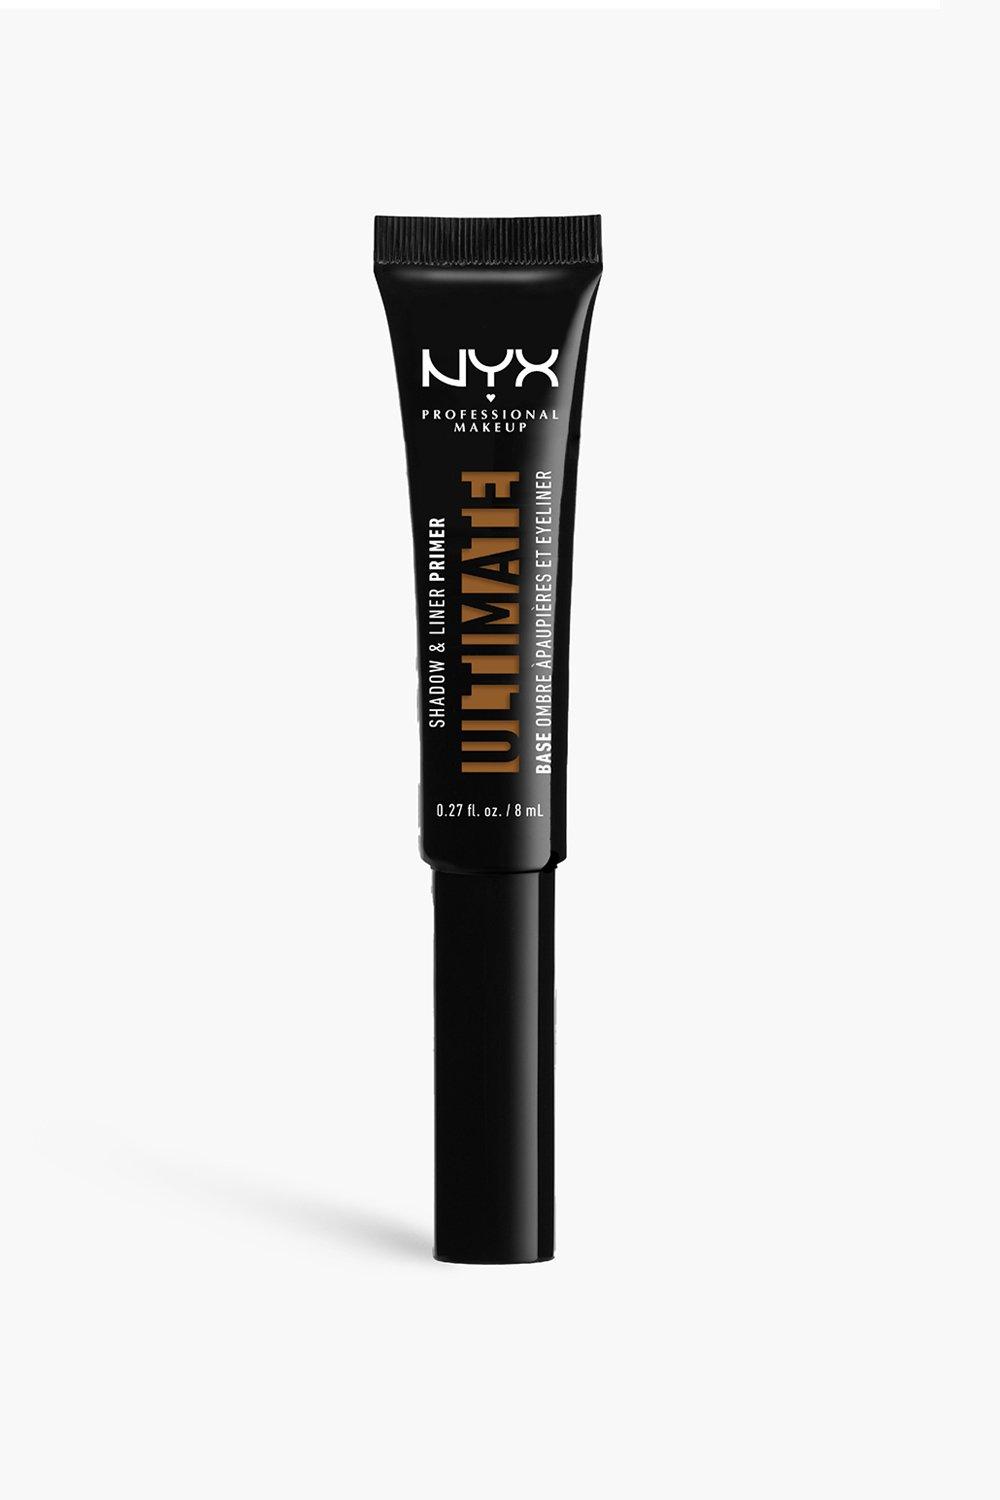 Nyx Professional Makeup Vitamin E Infused Ultimate Shadow And Liner Primer, 04 Deep